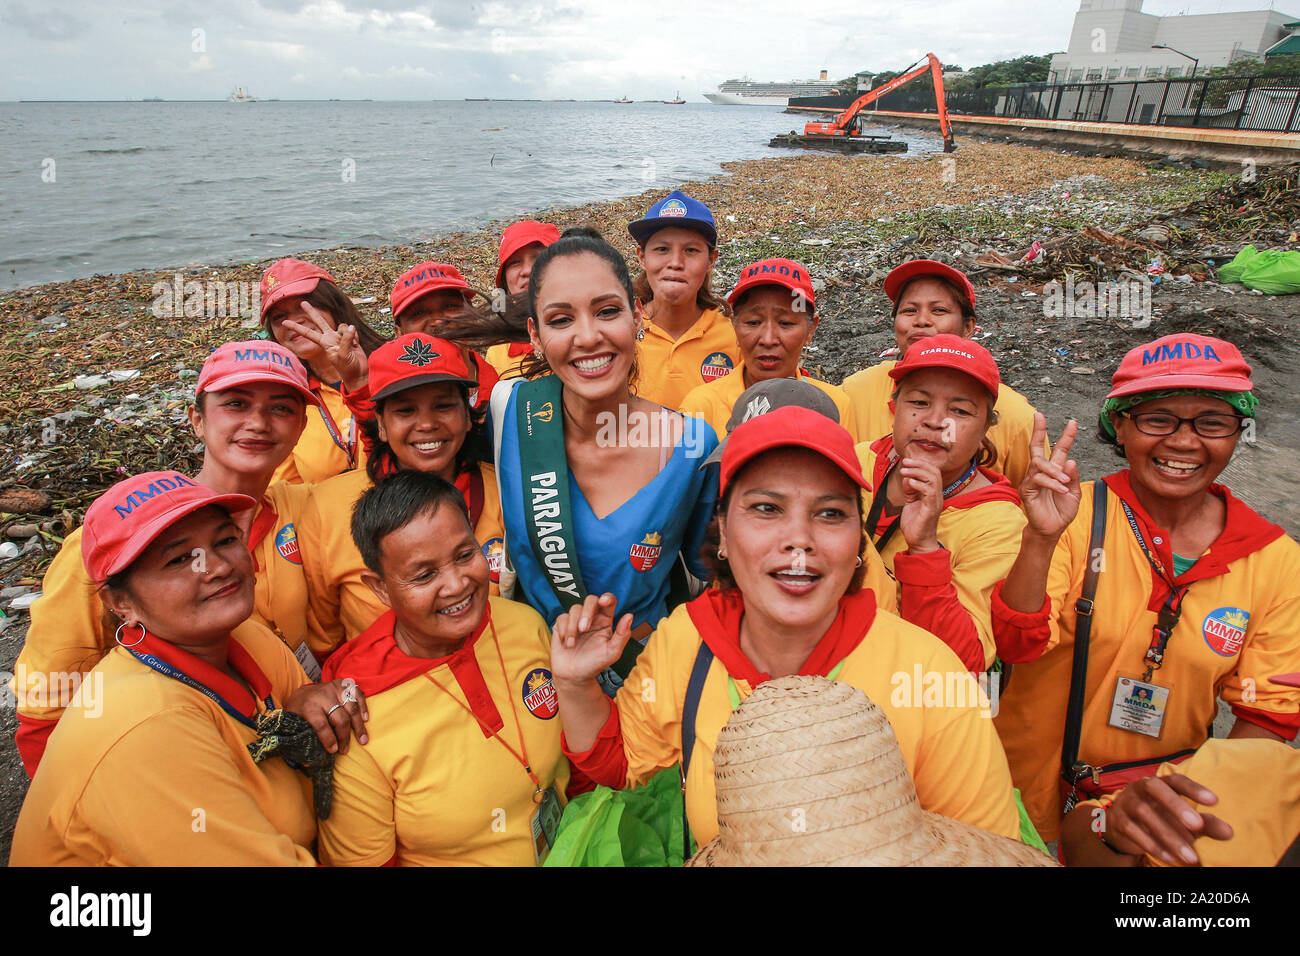 Manila, Sept. 30. 26th Oct, 2019. Miss Earth 2019 candidate Jociani Repossi (C) takes a photo with workers from the Metropolitan Manila Development Authority (MMDA) during a coastal cleanup in Manila, the Philippines, Sept. 30, 2019. The coastal cleanup is part of the activities leading up to the Miss Earth 2019 coronation night in Naga Province on Oct. 26, 2019. Credit: Rouelle Umali/Xinhua/Alamy Live News Stock Photo